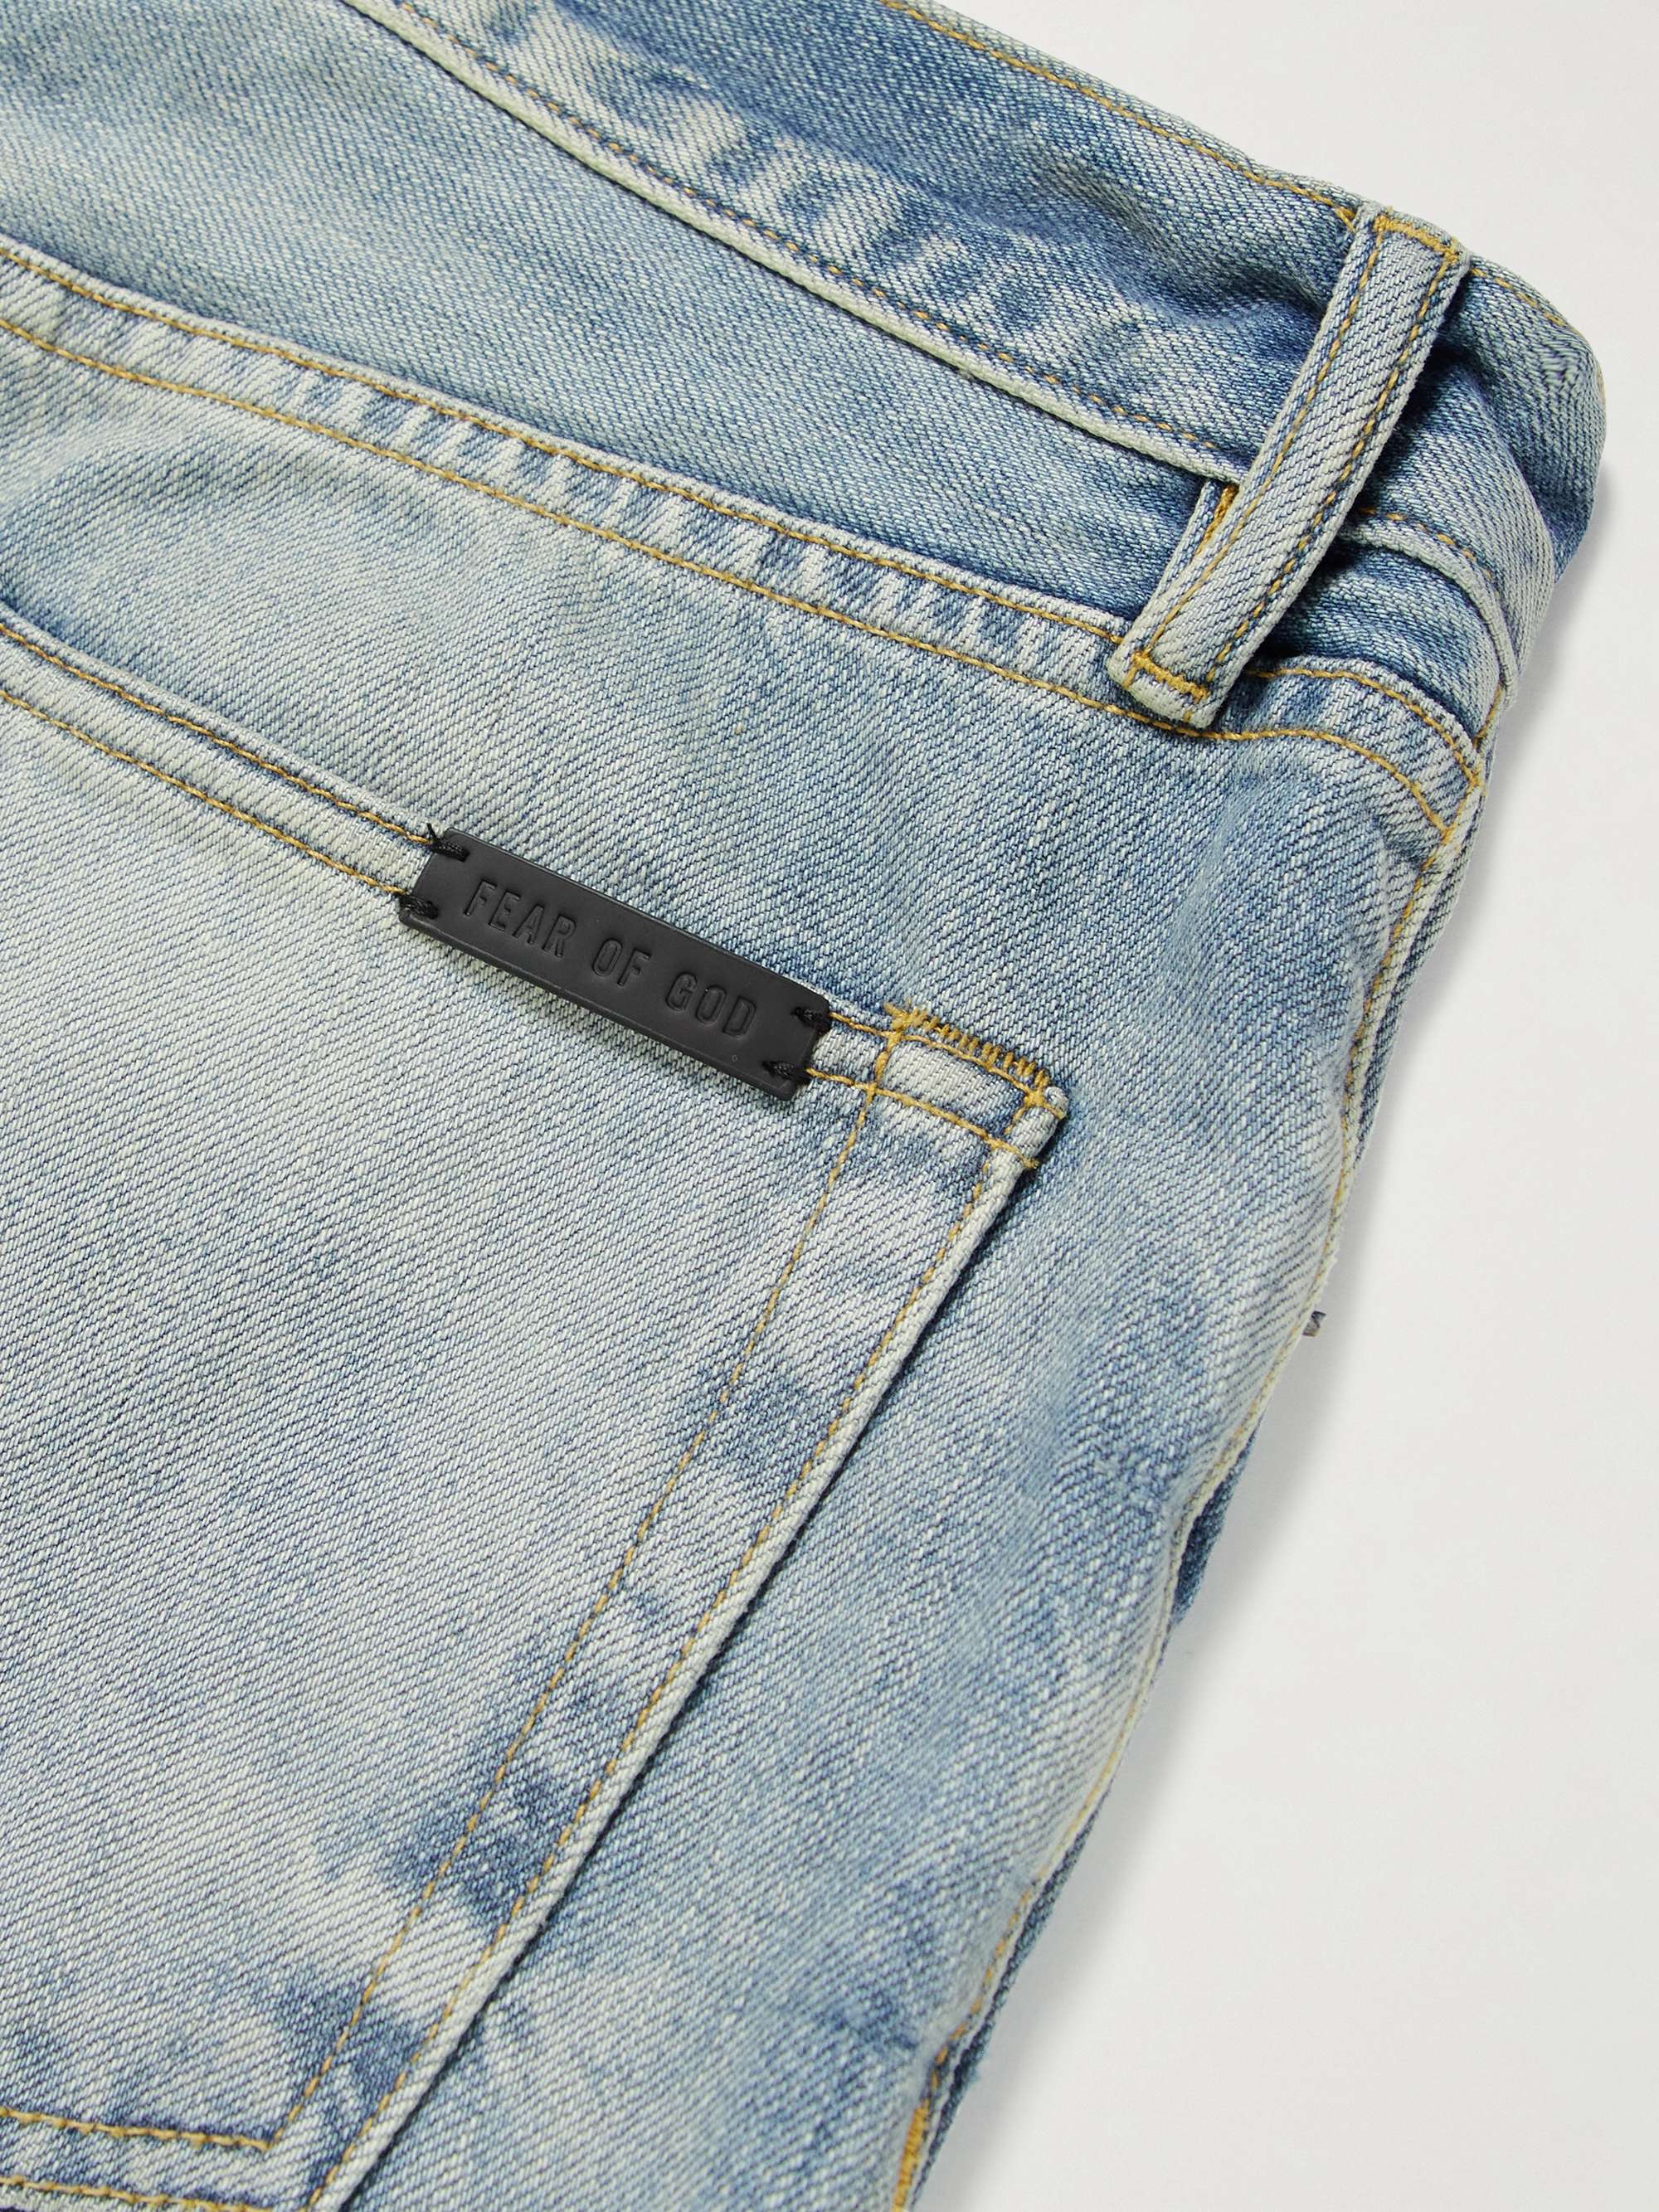 FEAR OF GOD Slim-Fit Distressed Jeans